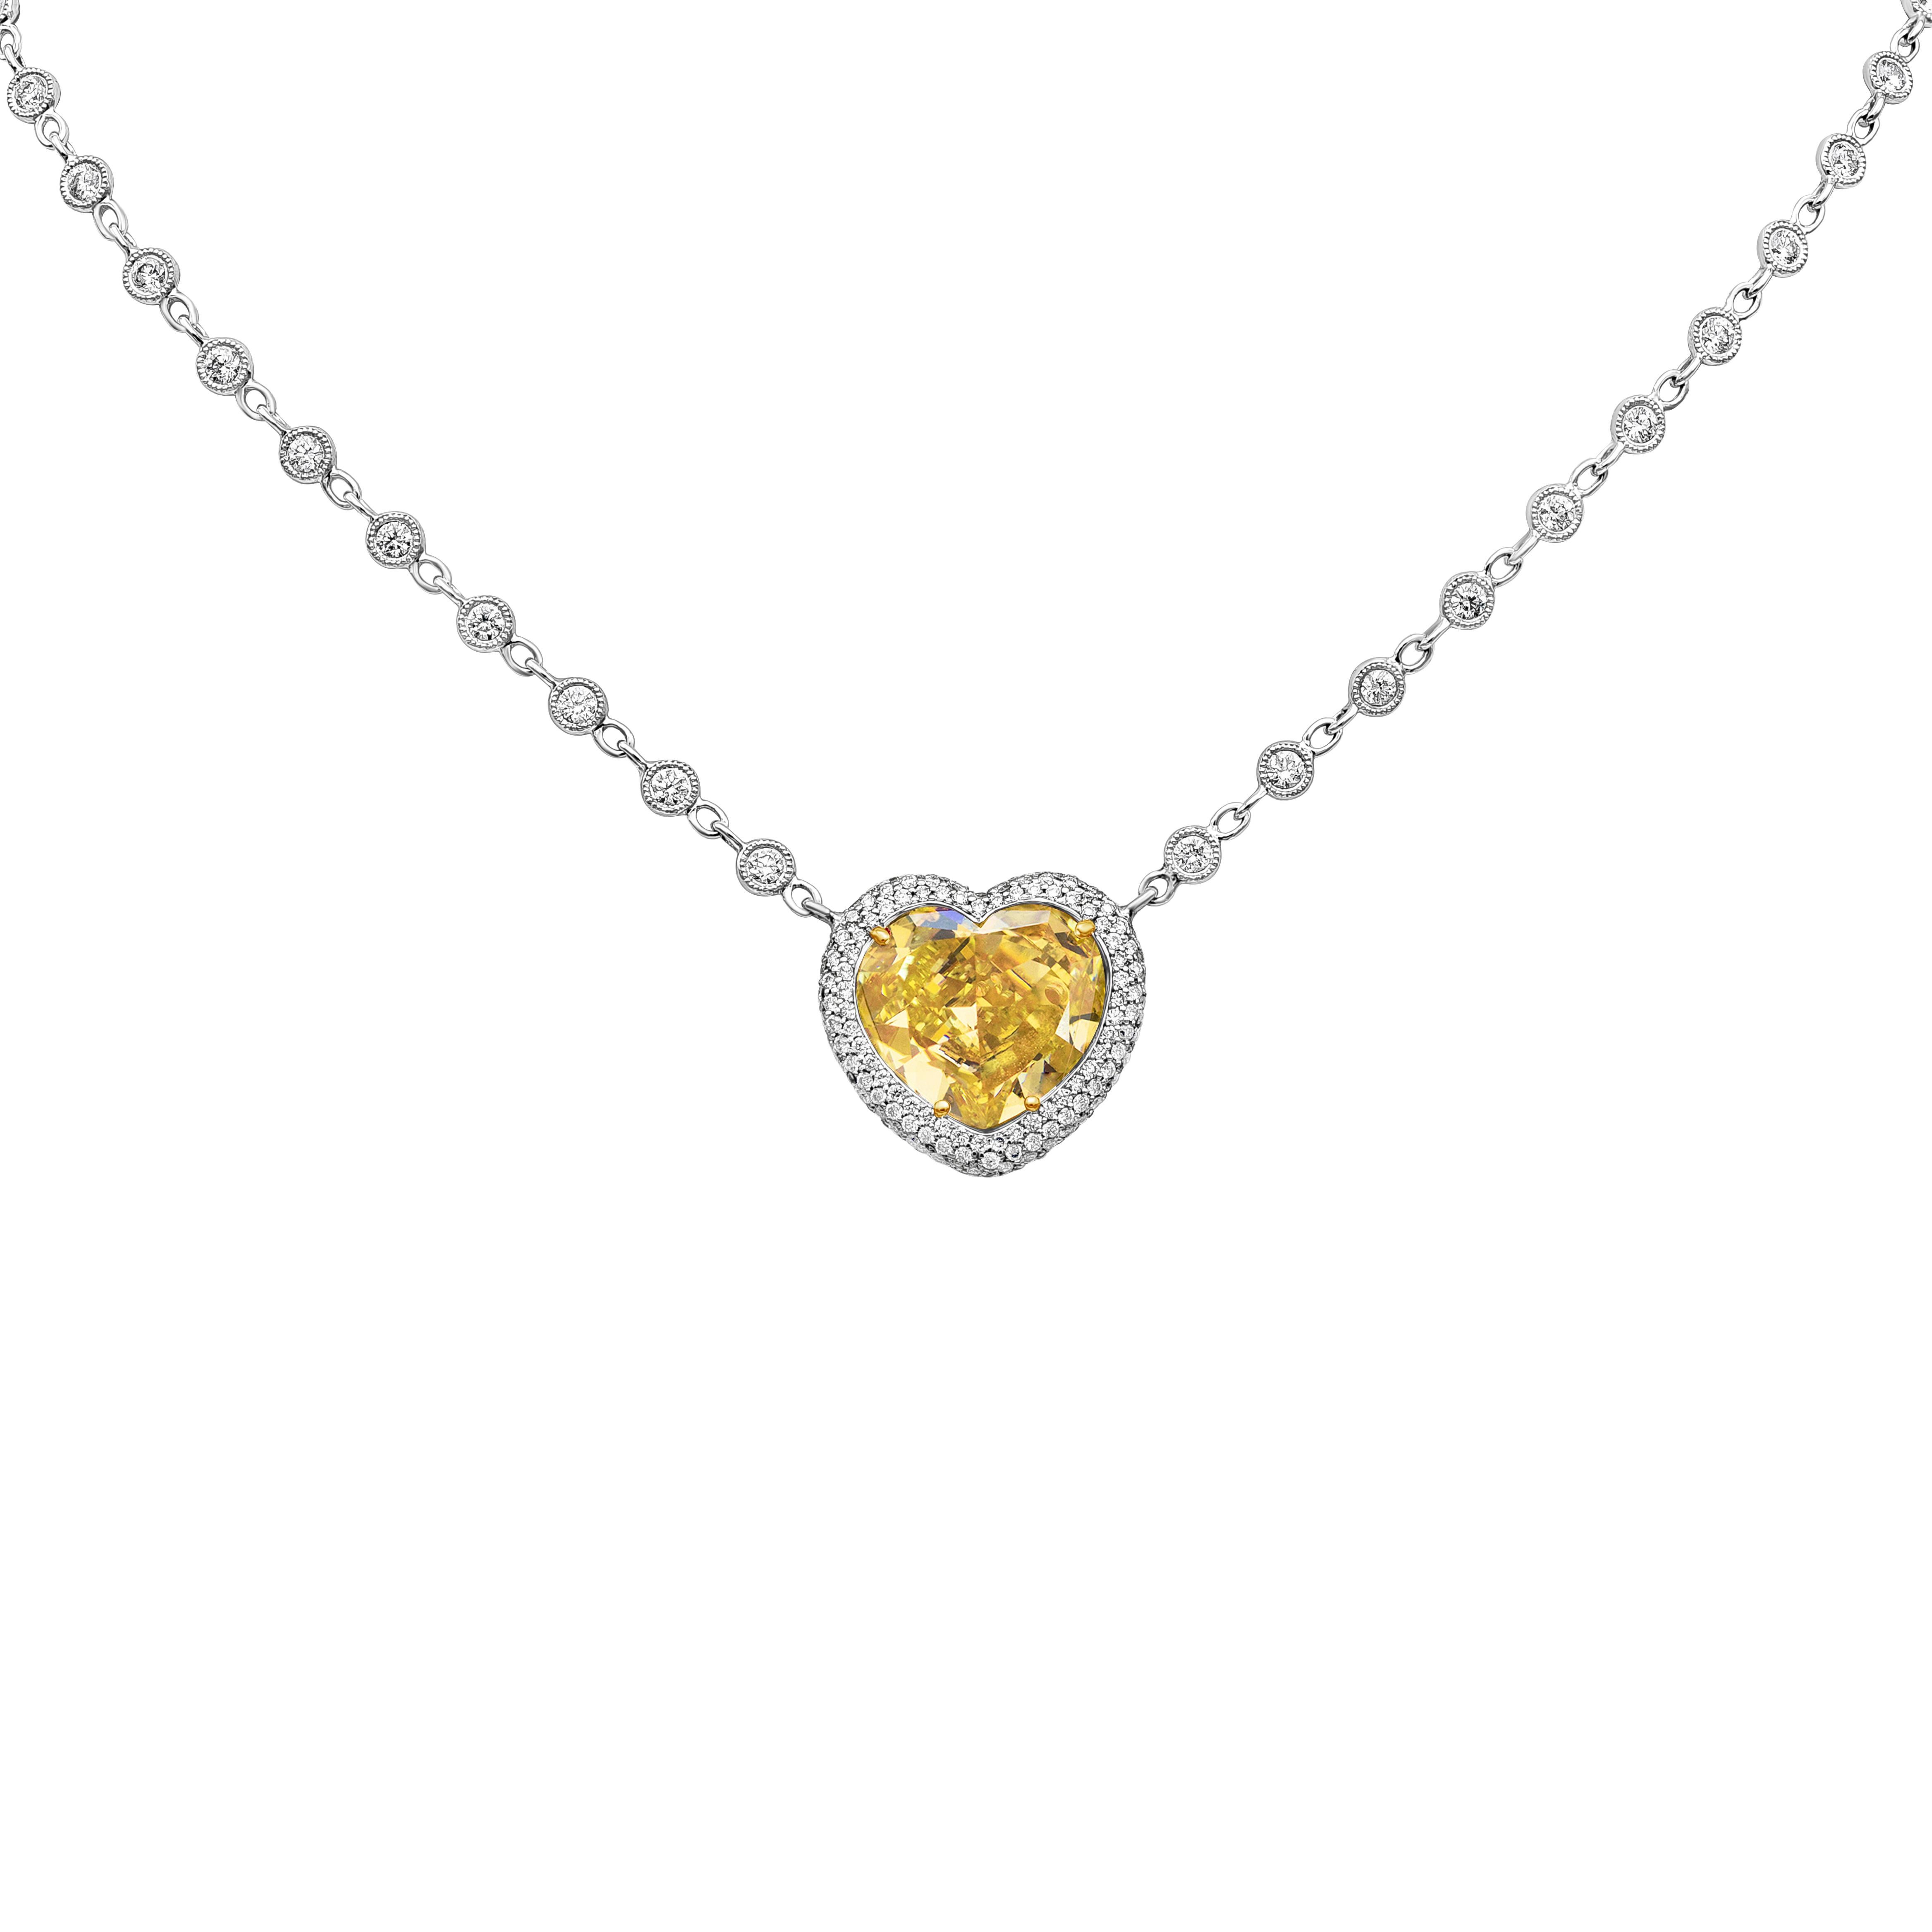 This elegant pendant features a GIA Certified 7.77 carats fancy yellow heart-shape diamond, SI2 in Clarity. The center stone accented by 432 round brilliant diamonds pave set all around and on the back, Round diamonds weighing 1.64 carats total.